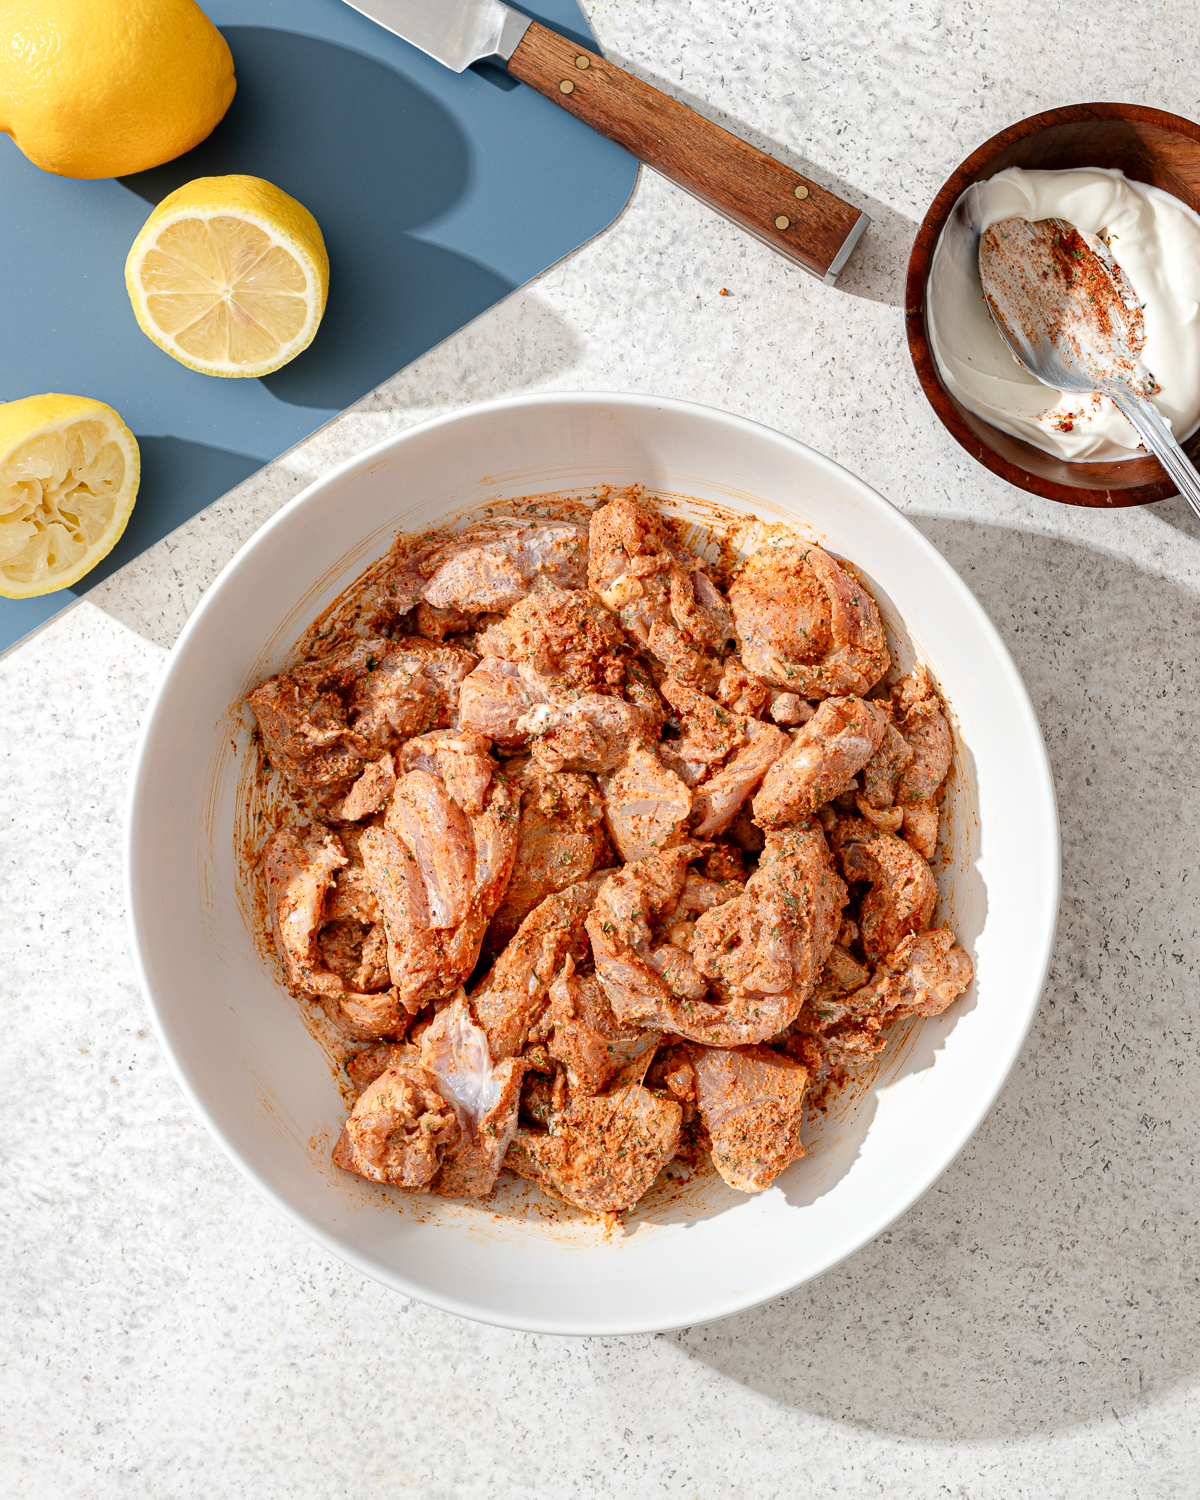 Chicken in a bowl for halal cart chicken recipe.